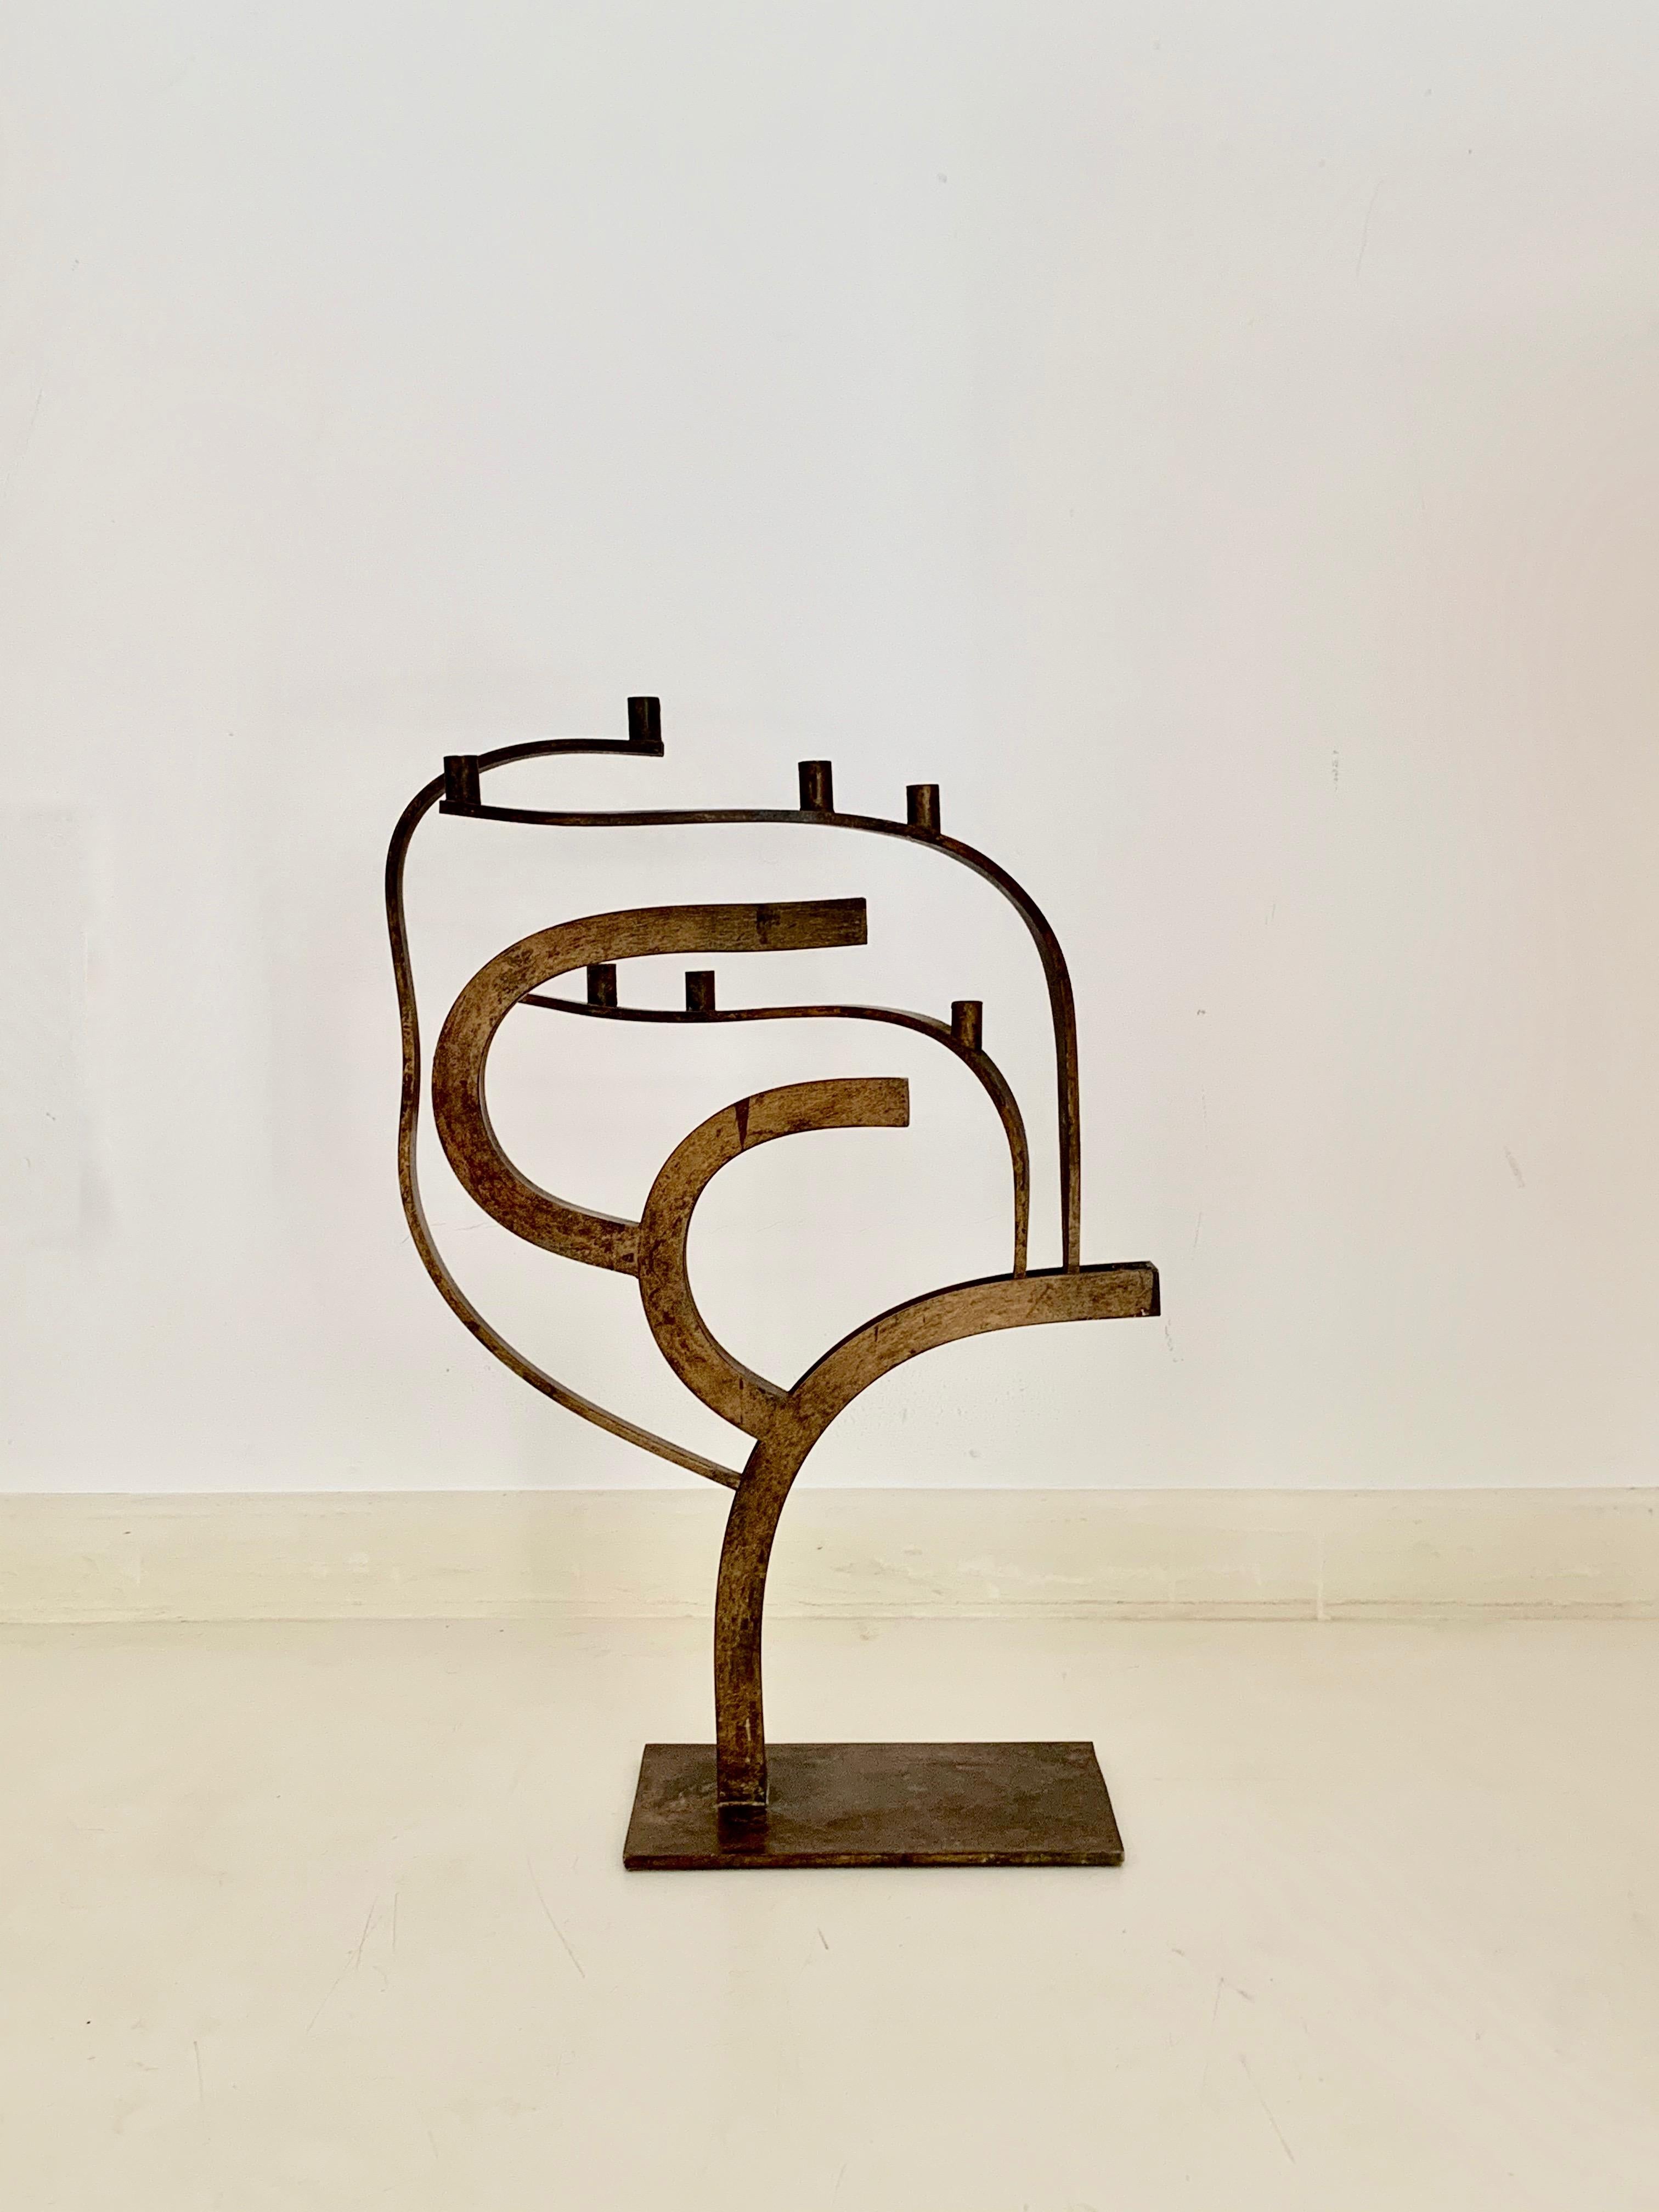 Iron candelabra by Mary Callery
Sculpted iron candelabra
Modernist, freeform Design
Modern and Abstract Expressionist Sculpture,
circa 1950
Good vintage condition
Mary Callery (June 19, 1903 – February 12, 1977) was an American artist known